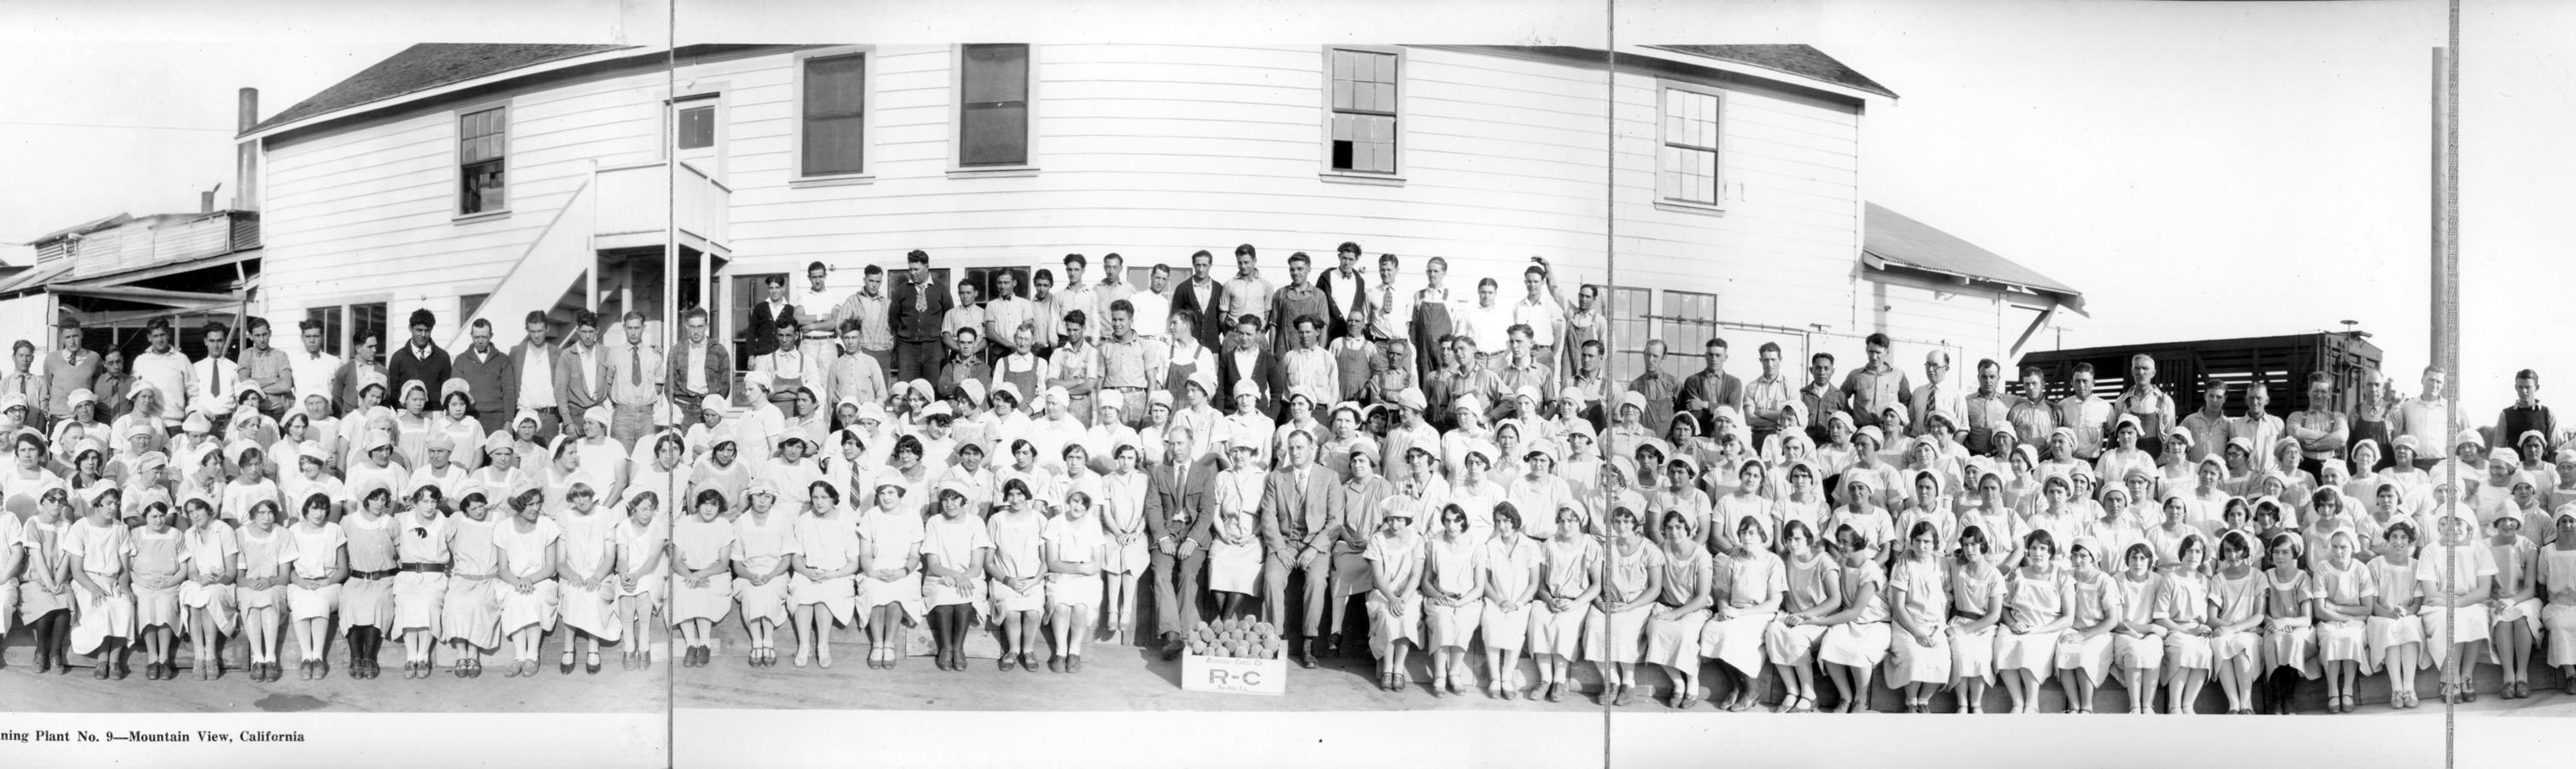 Employees from Richmond-Chase Company, plant no. 9.